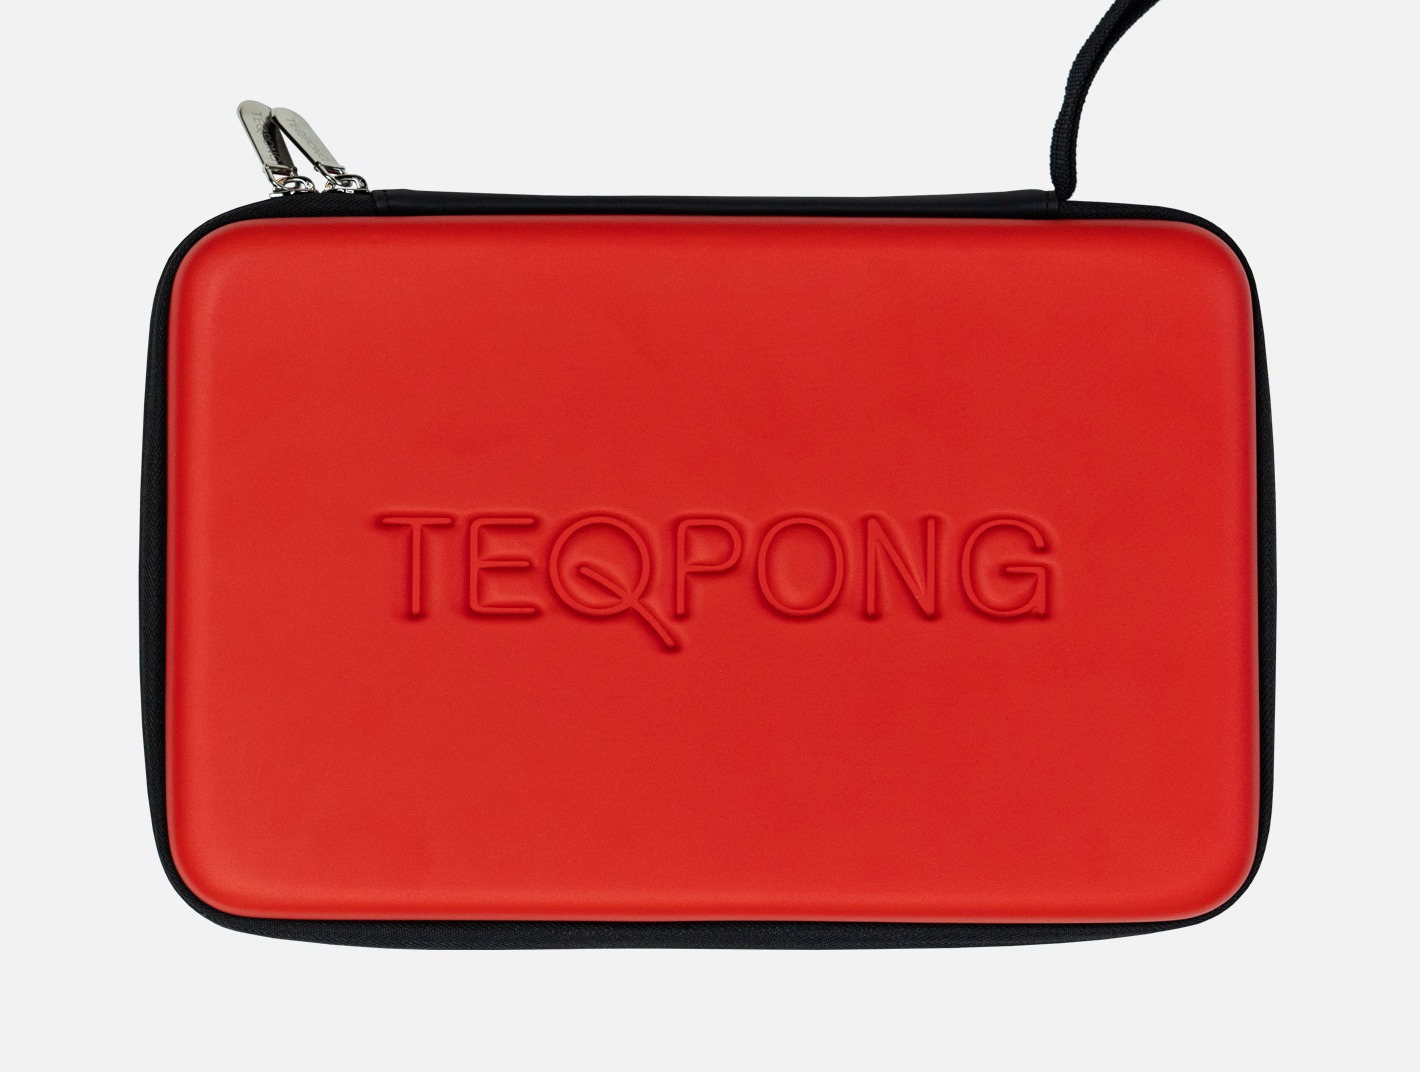 Teqpong case now available on the TEQ SHOP!